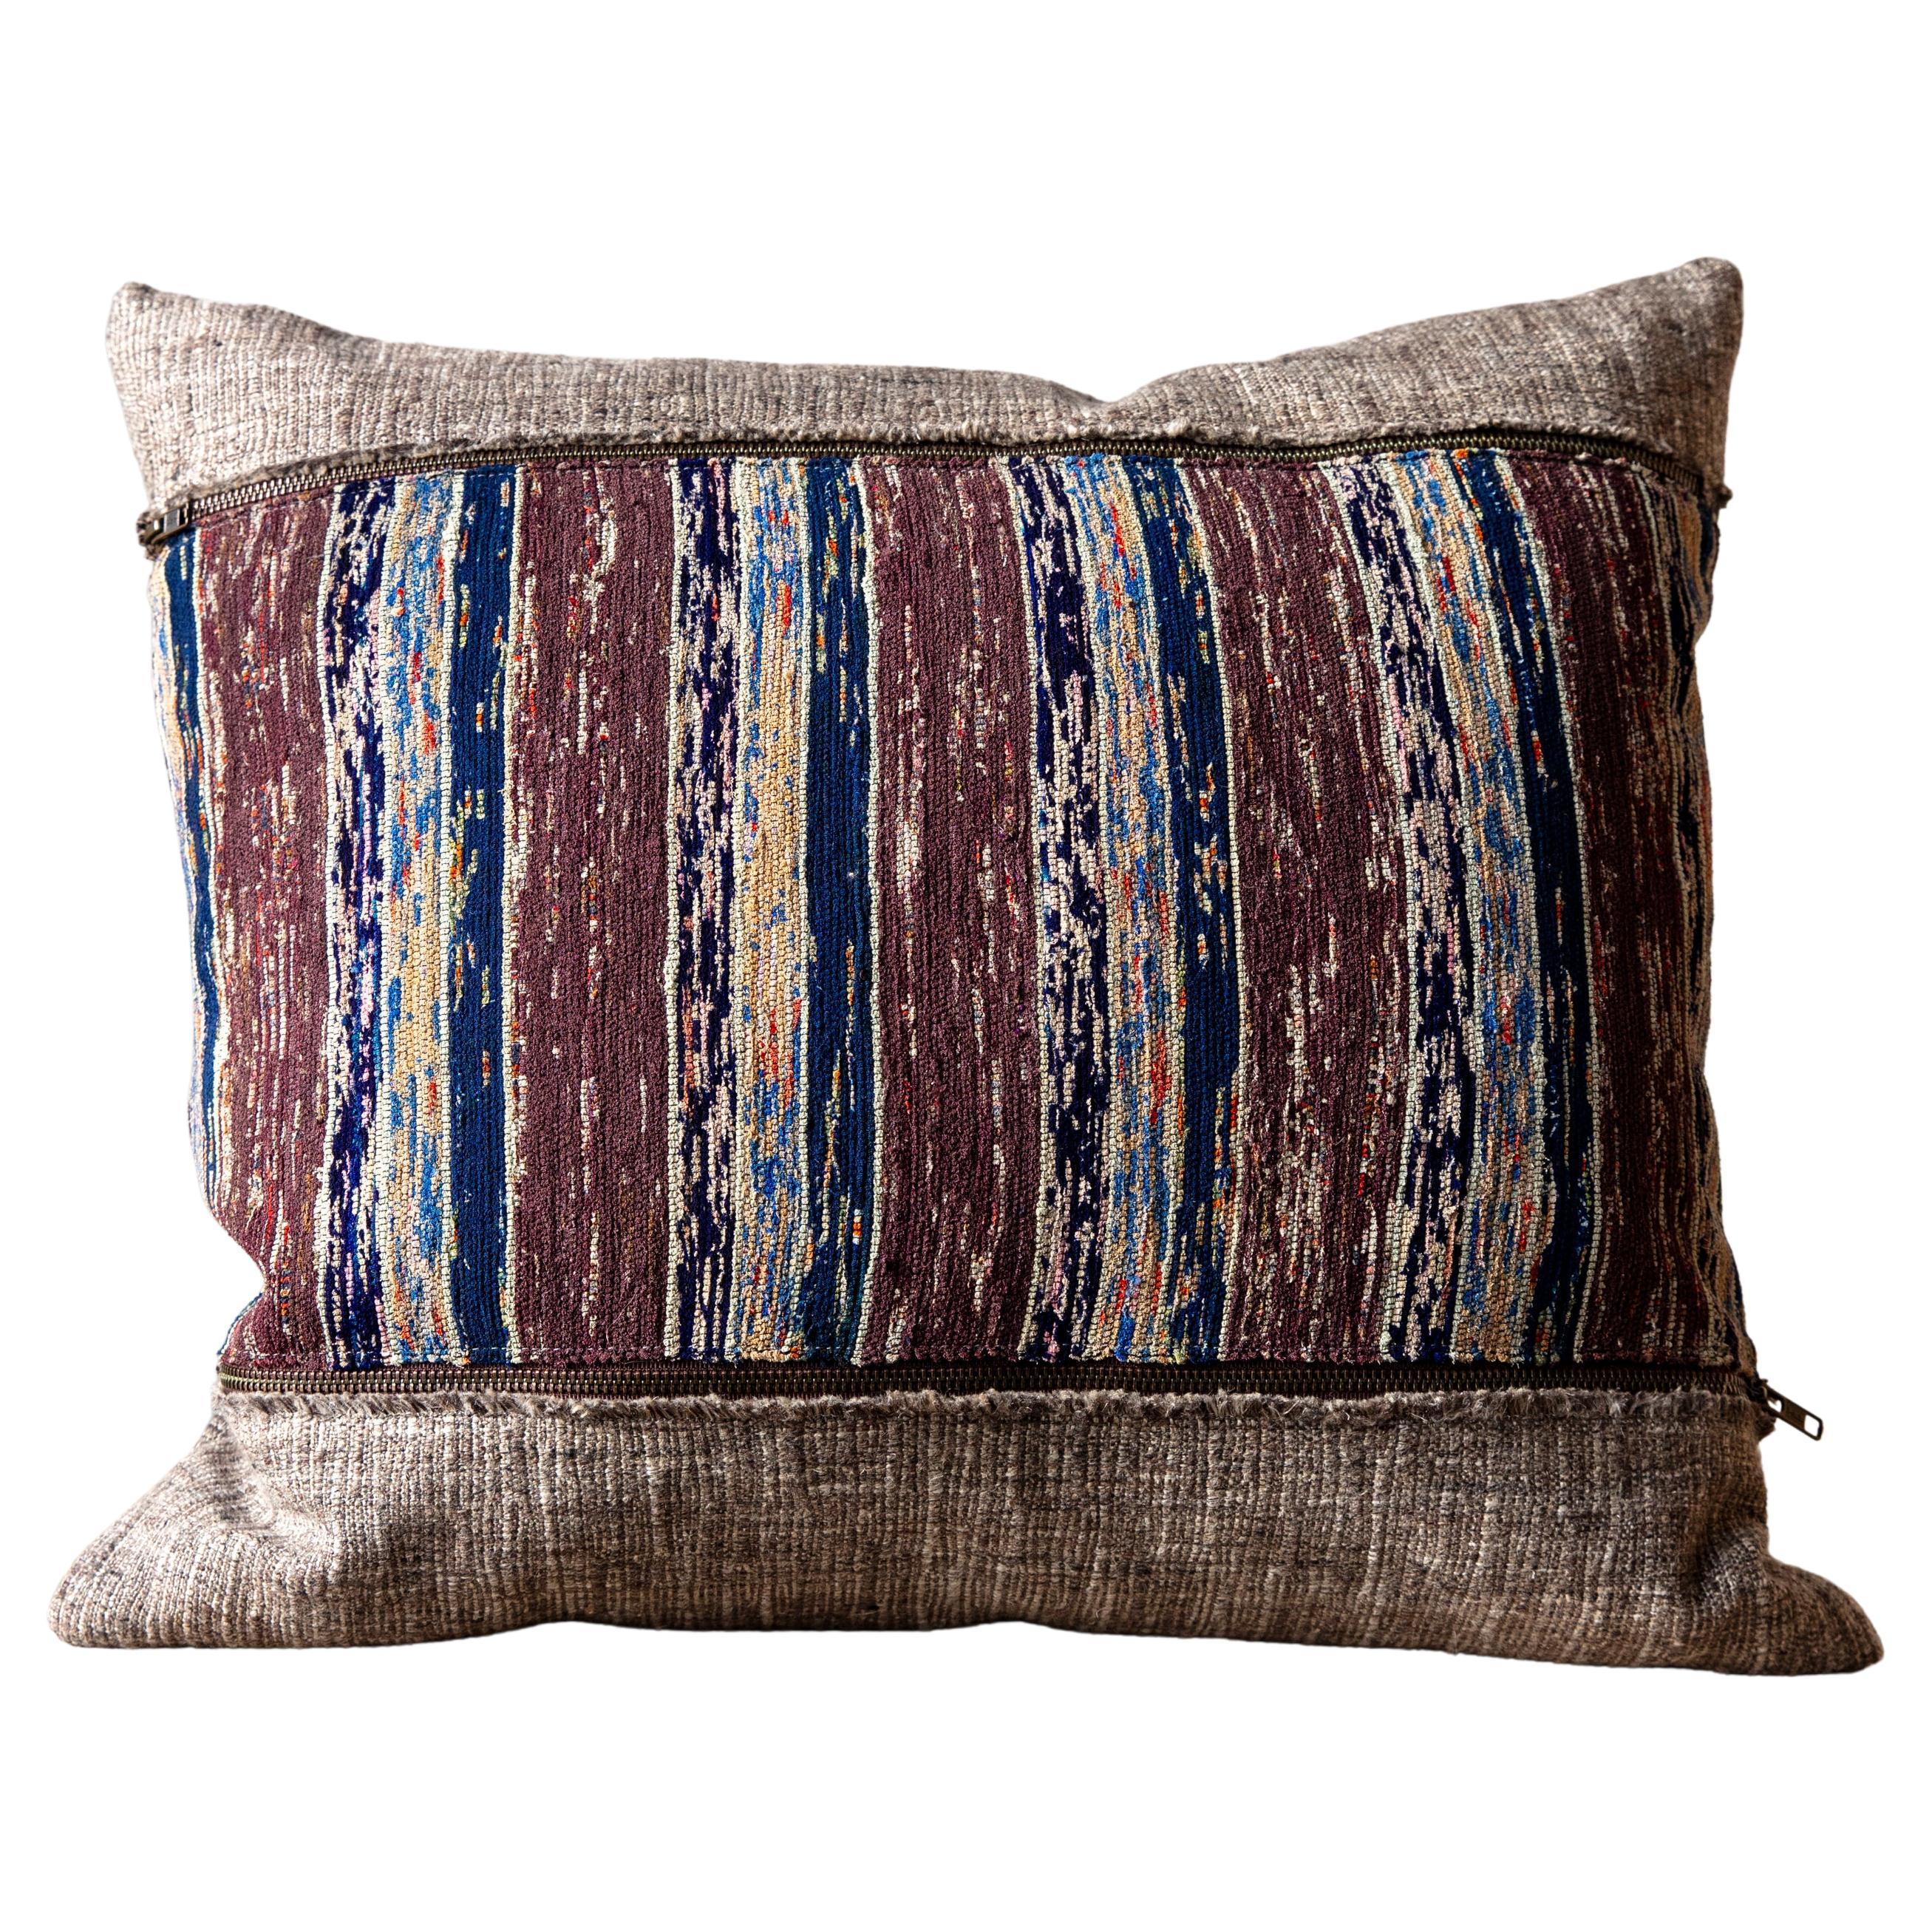 Housewright Gallery Pillows For Sale